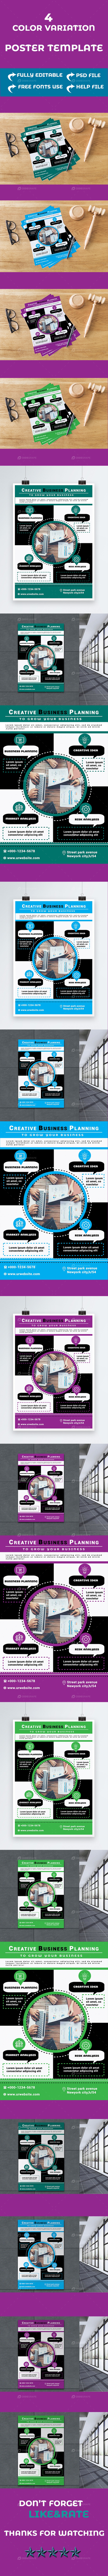 Creative Business Planning Poster